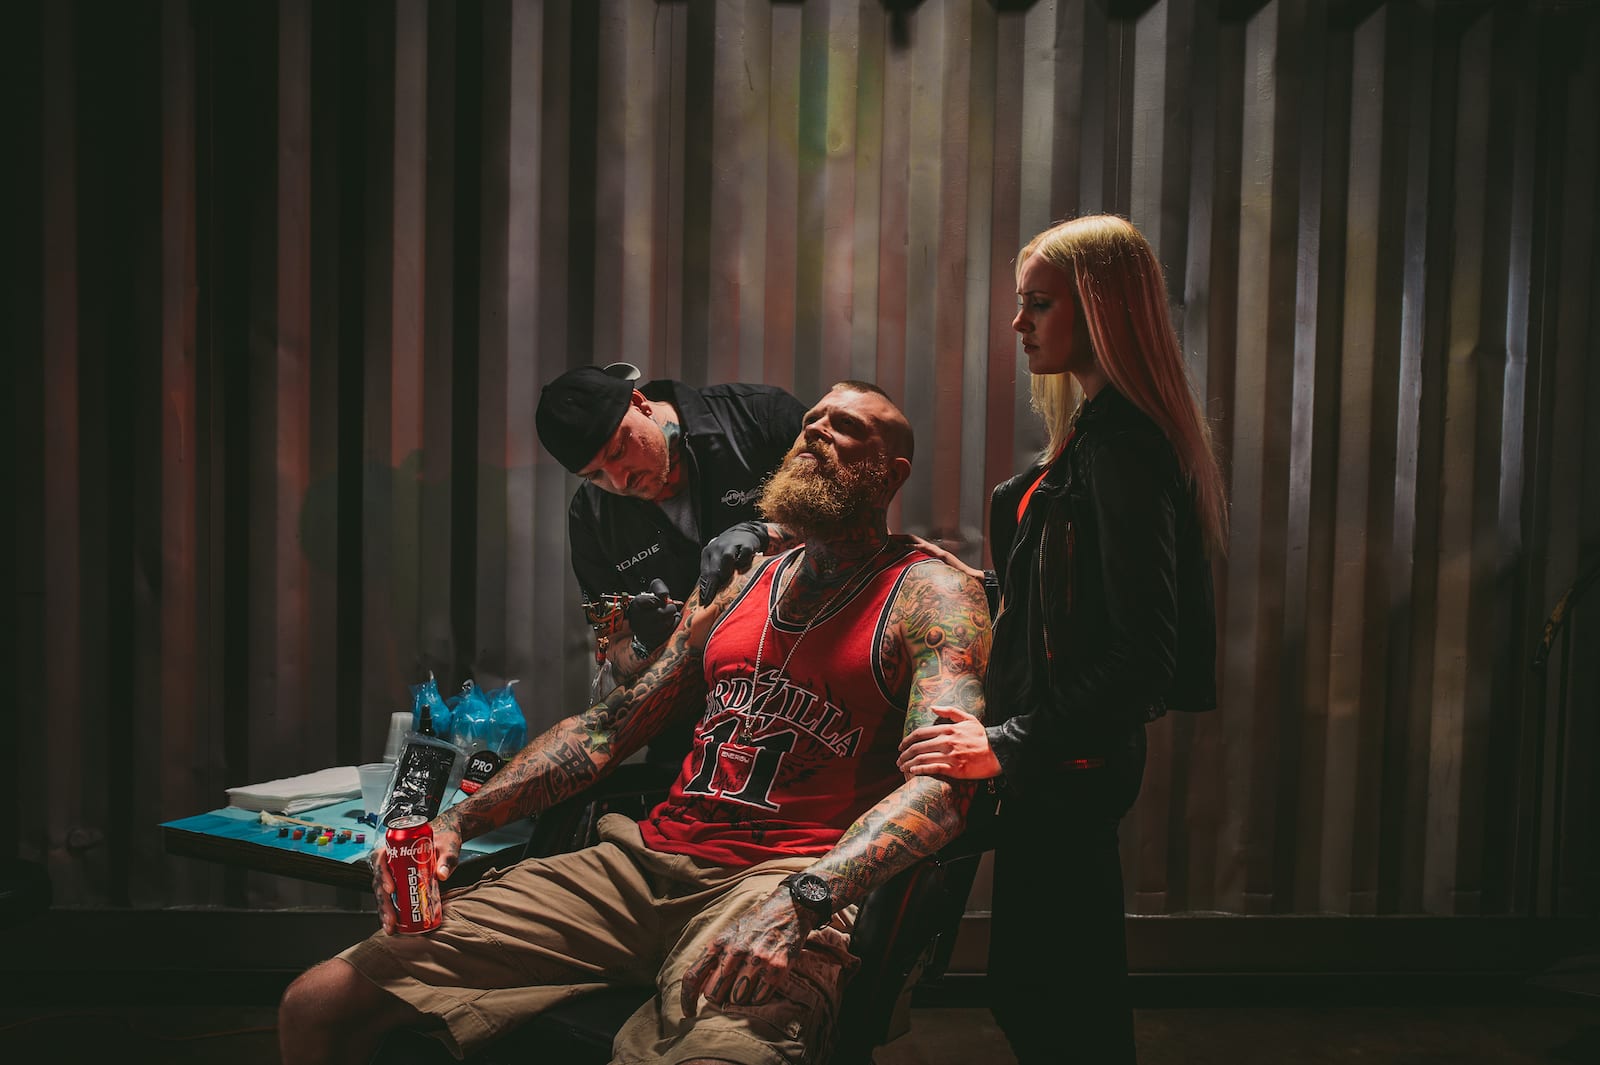 Bearded tattooed man holding Hard Rock Energy drinks with tattoo artist working on a tattoo with an assistant standing nearby